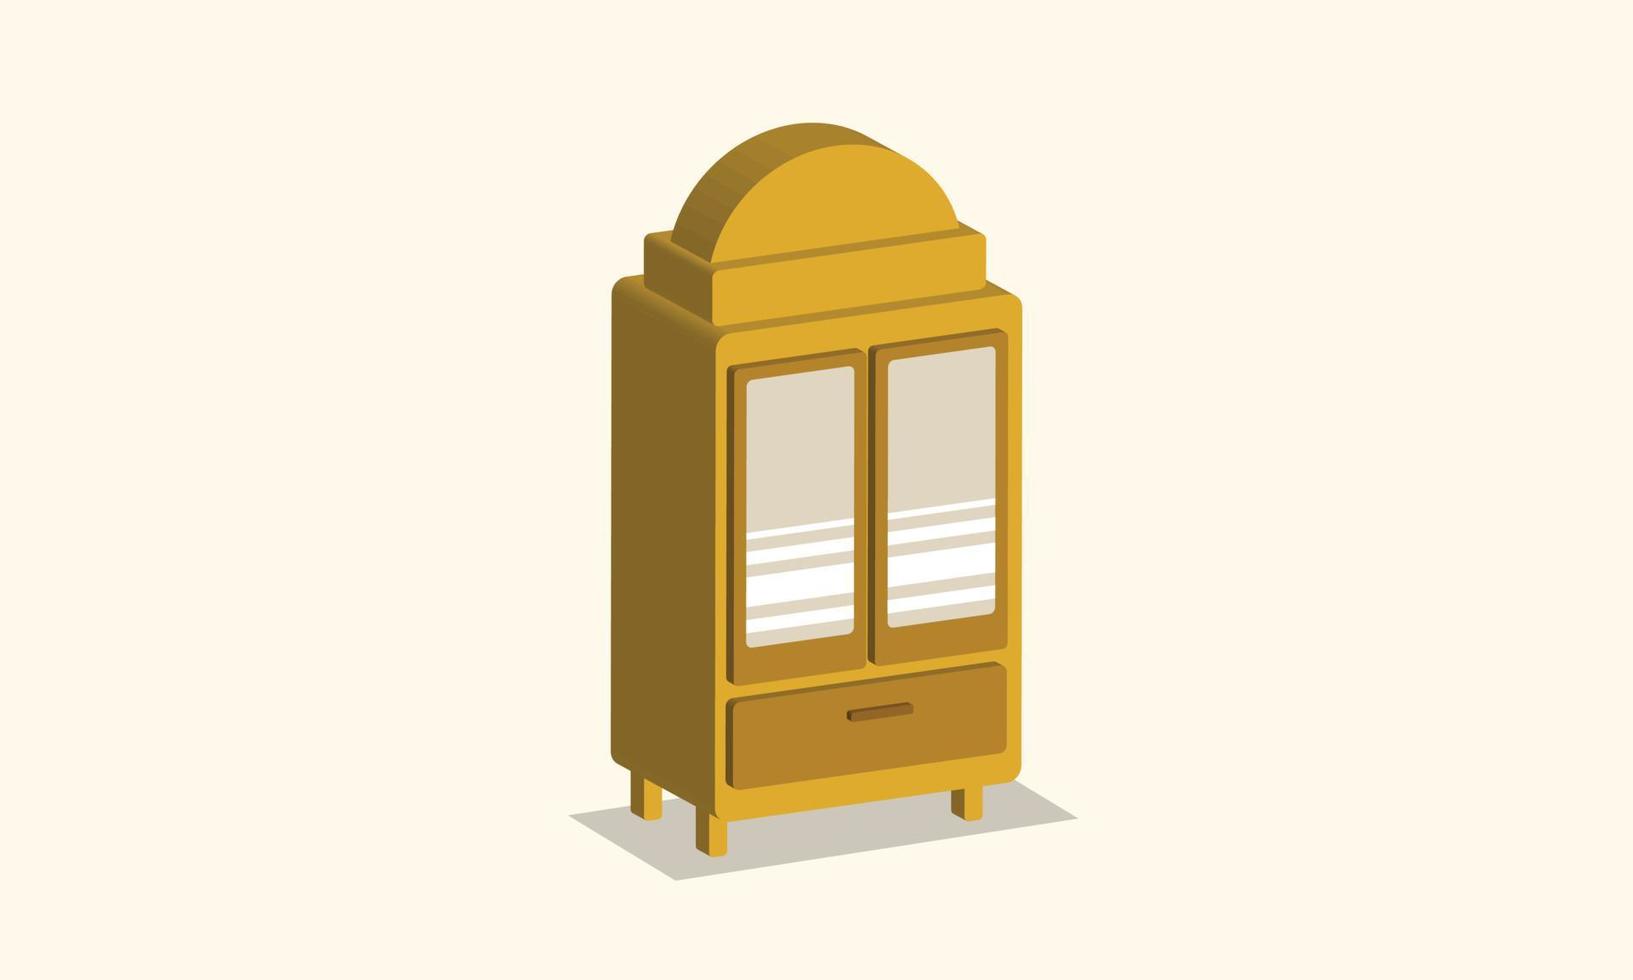 Isometric wooden cupboard with mirror design flat vector illustration. Isometry wardrobe or cabinet graphic design for furniture related design.